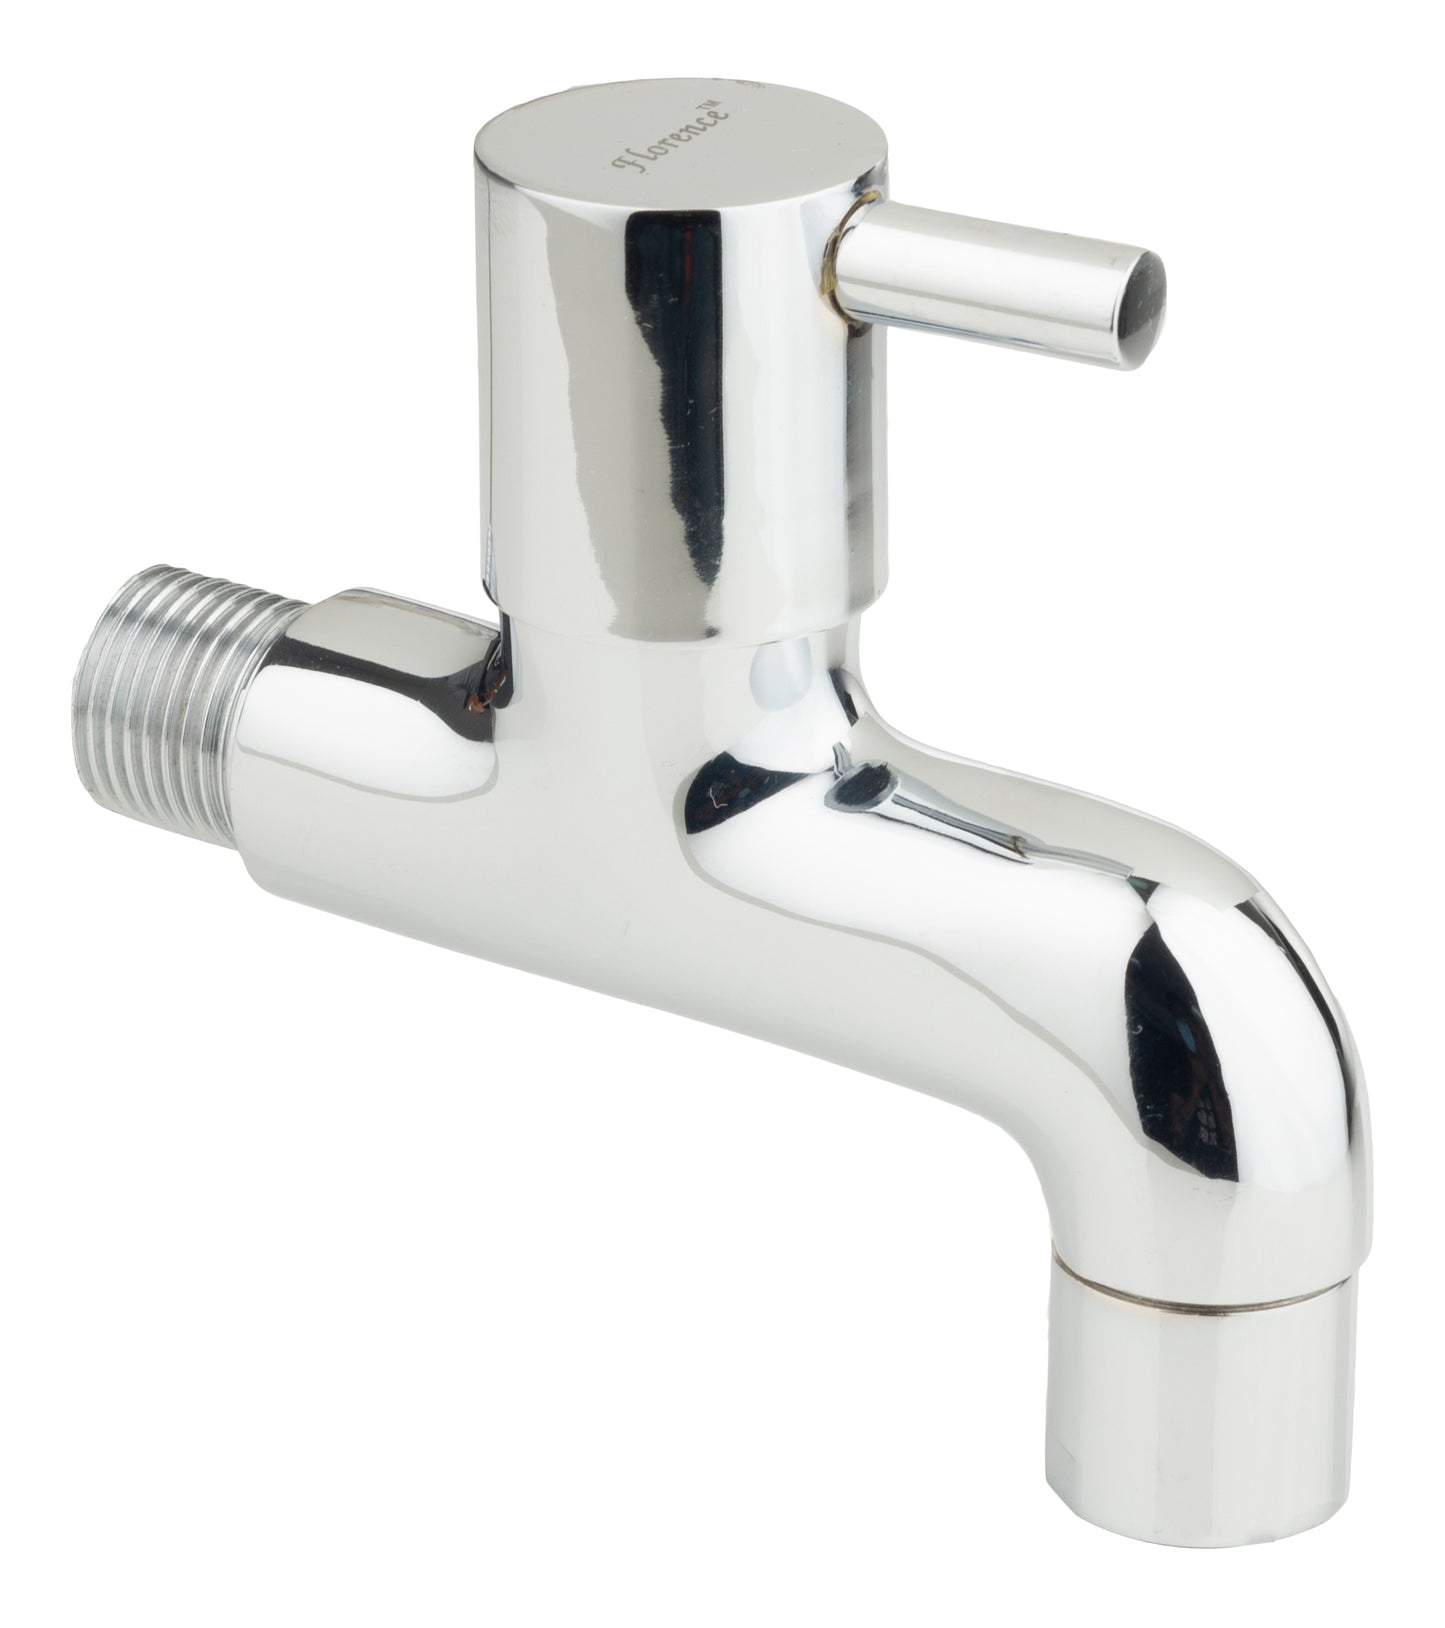 T-001 Bib cock brass tap with flange